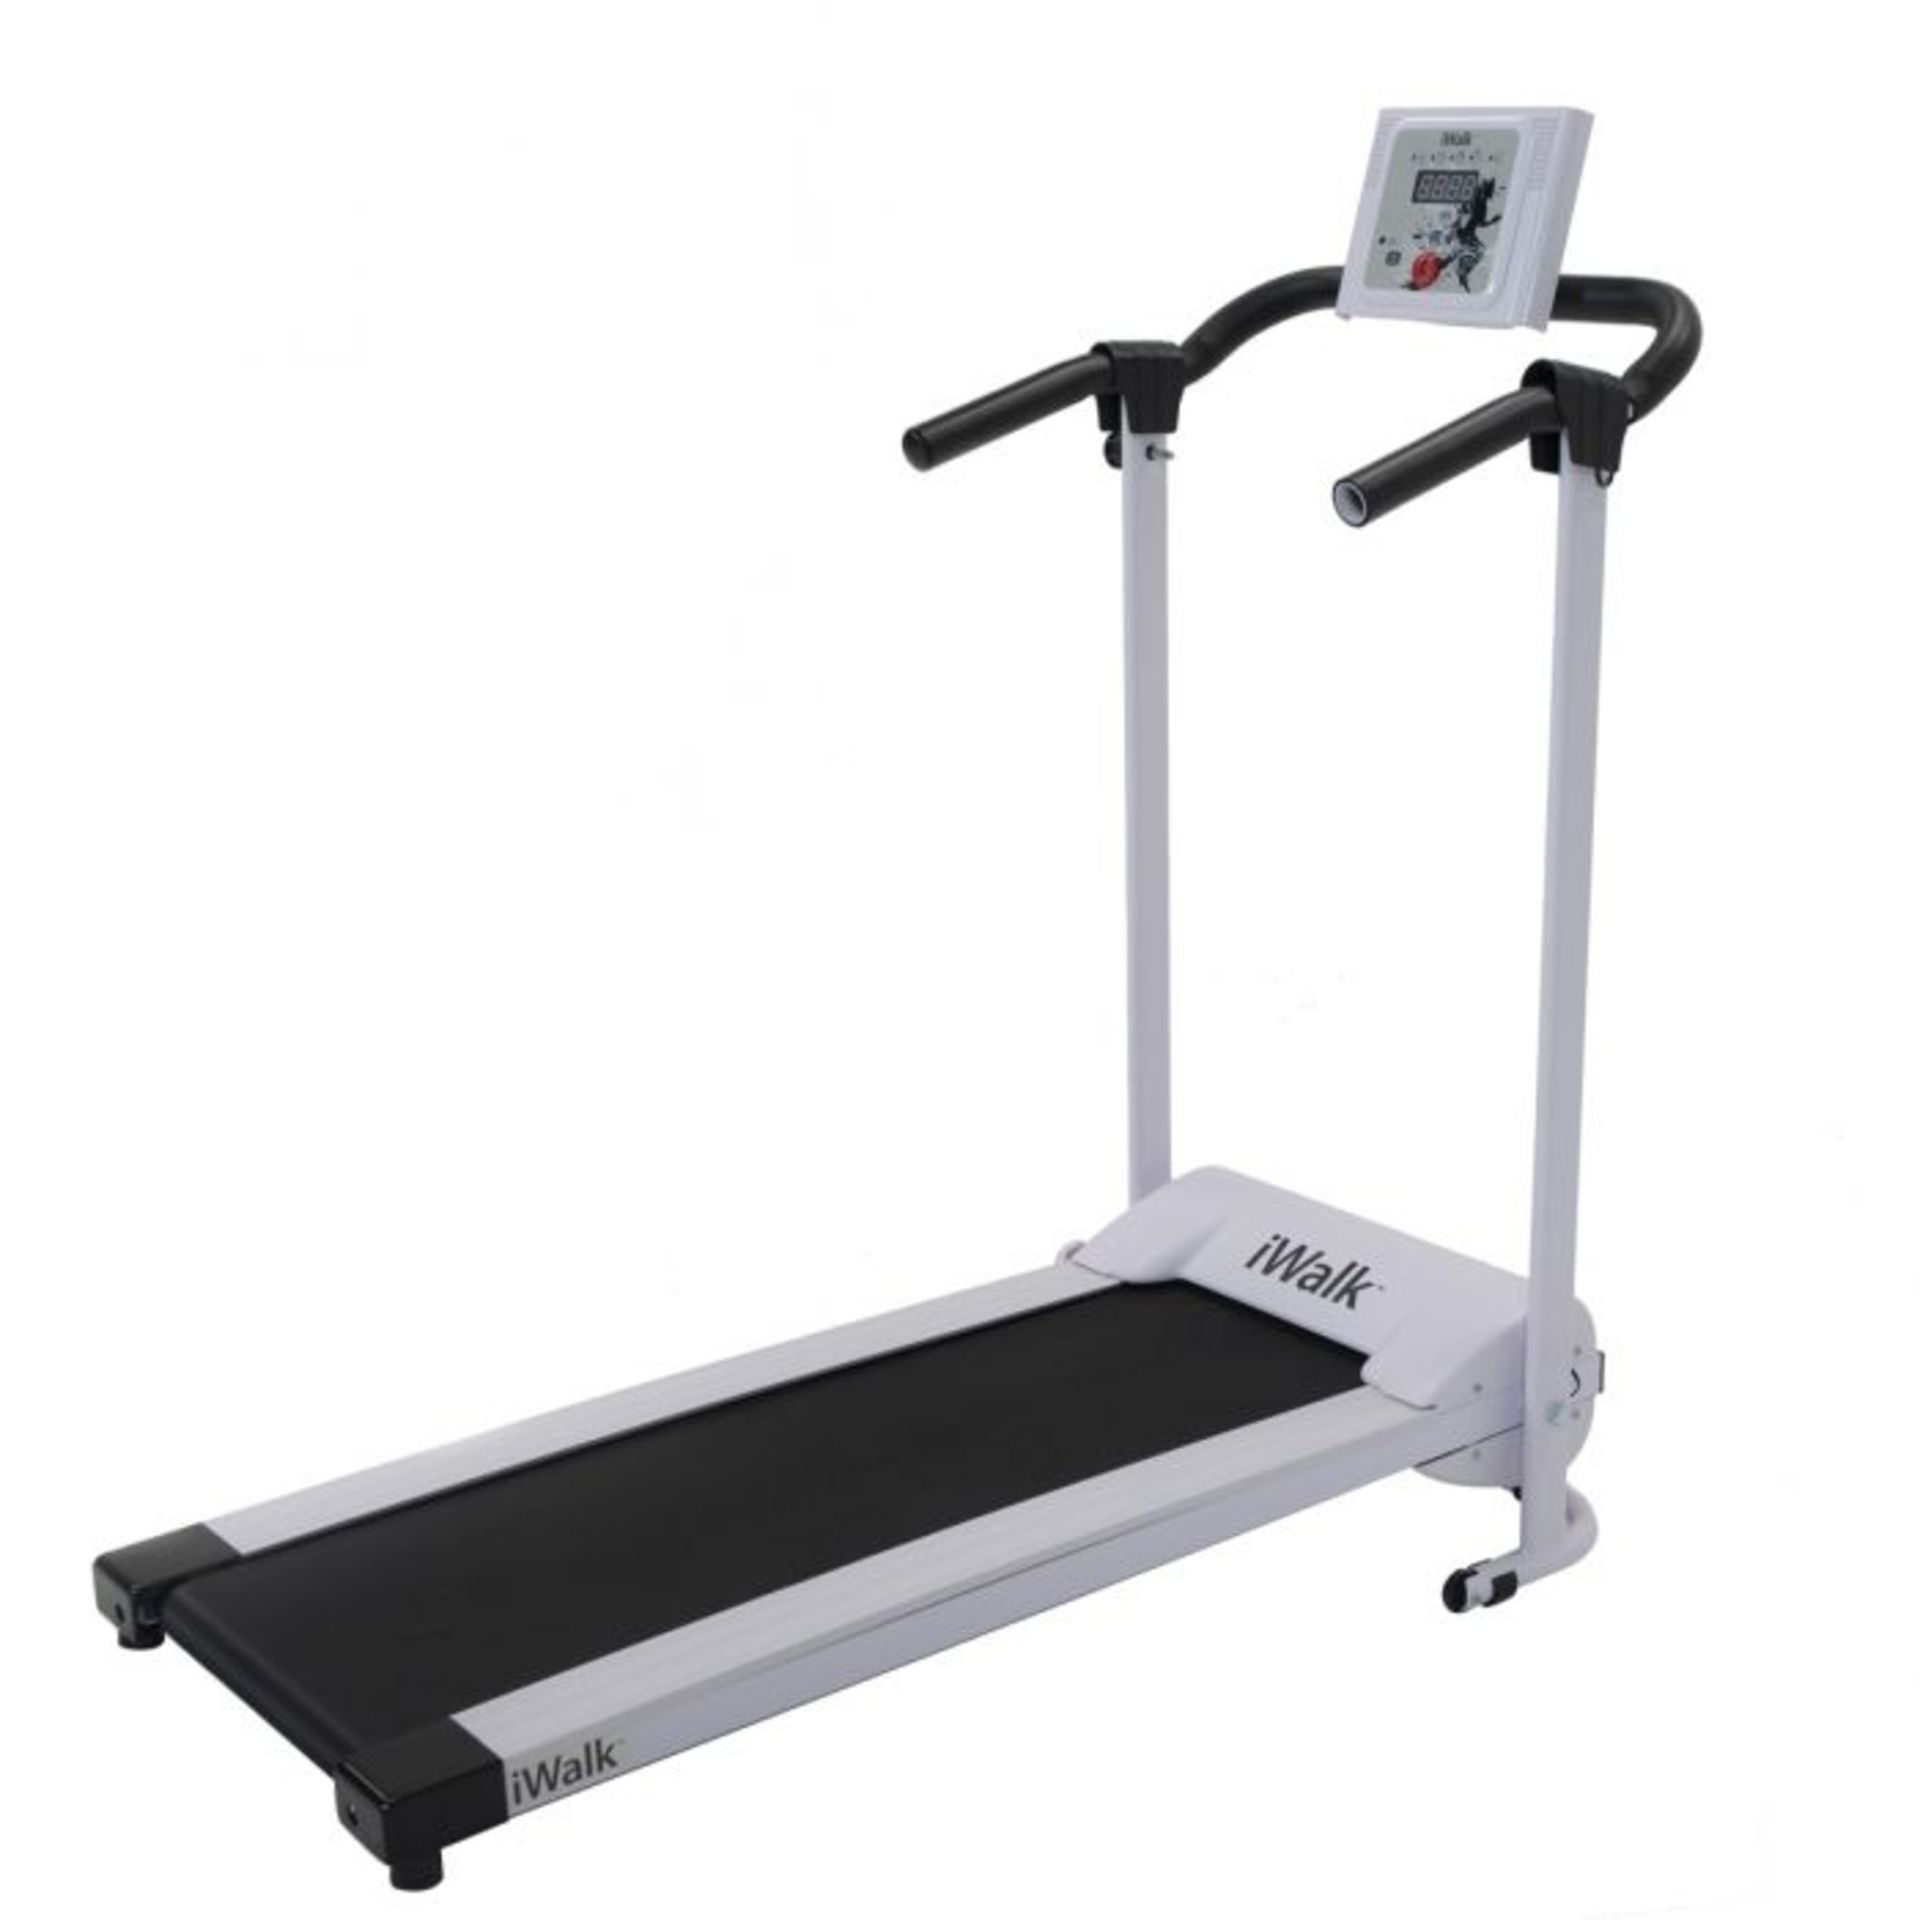 PALLET TO CONTAIN 3 X BOXED iWalk - THE COMPACT, POWERFUL HOME FRIENDLY TREADMILL. RRP £349.99 EACH.